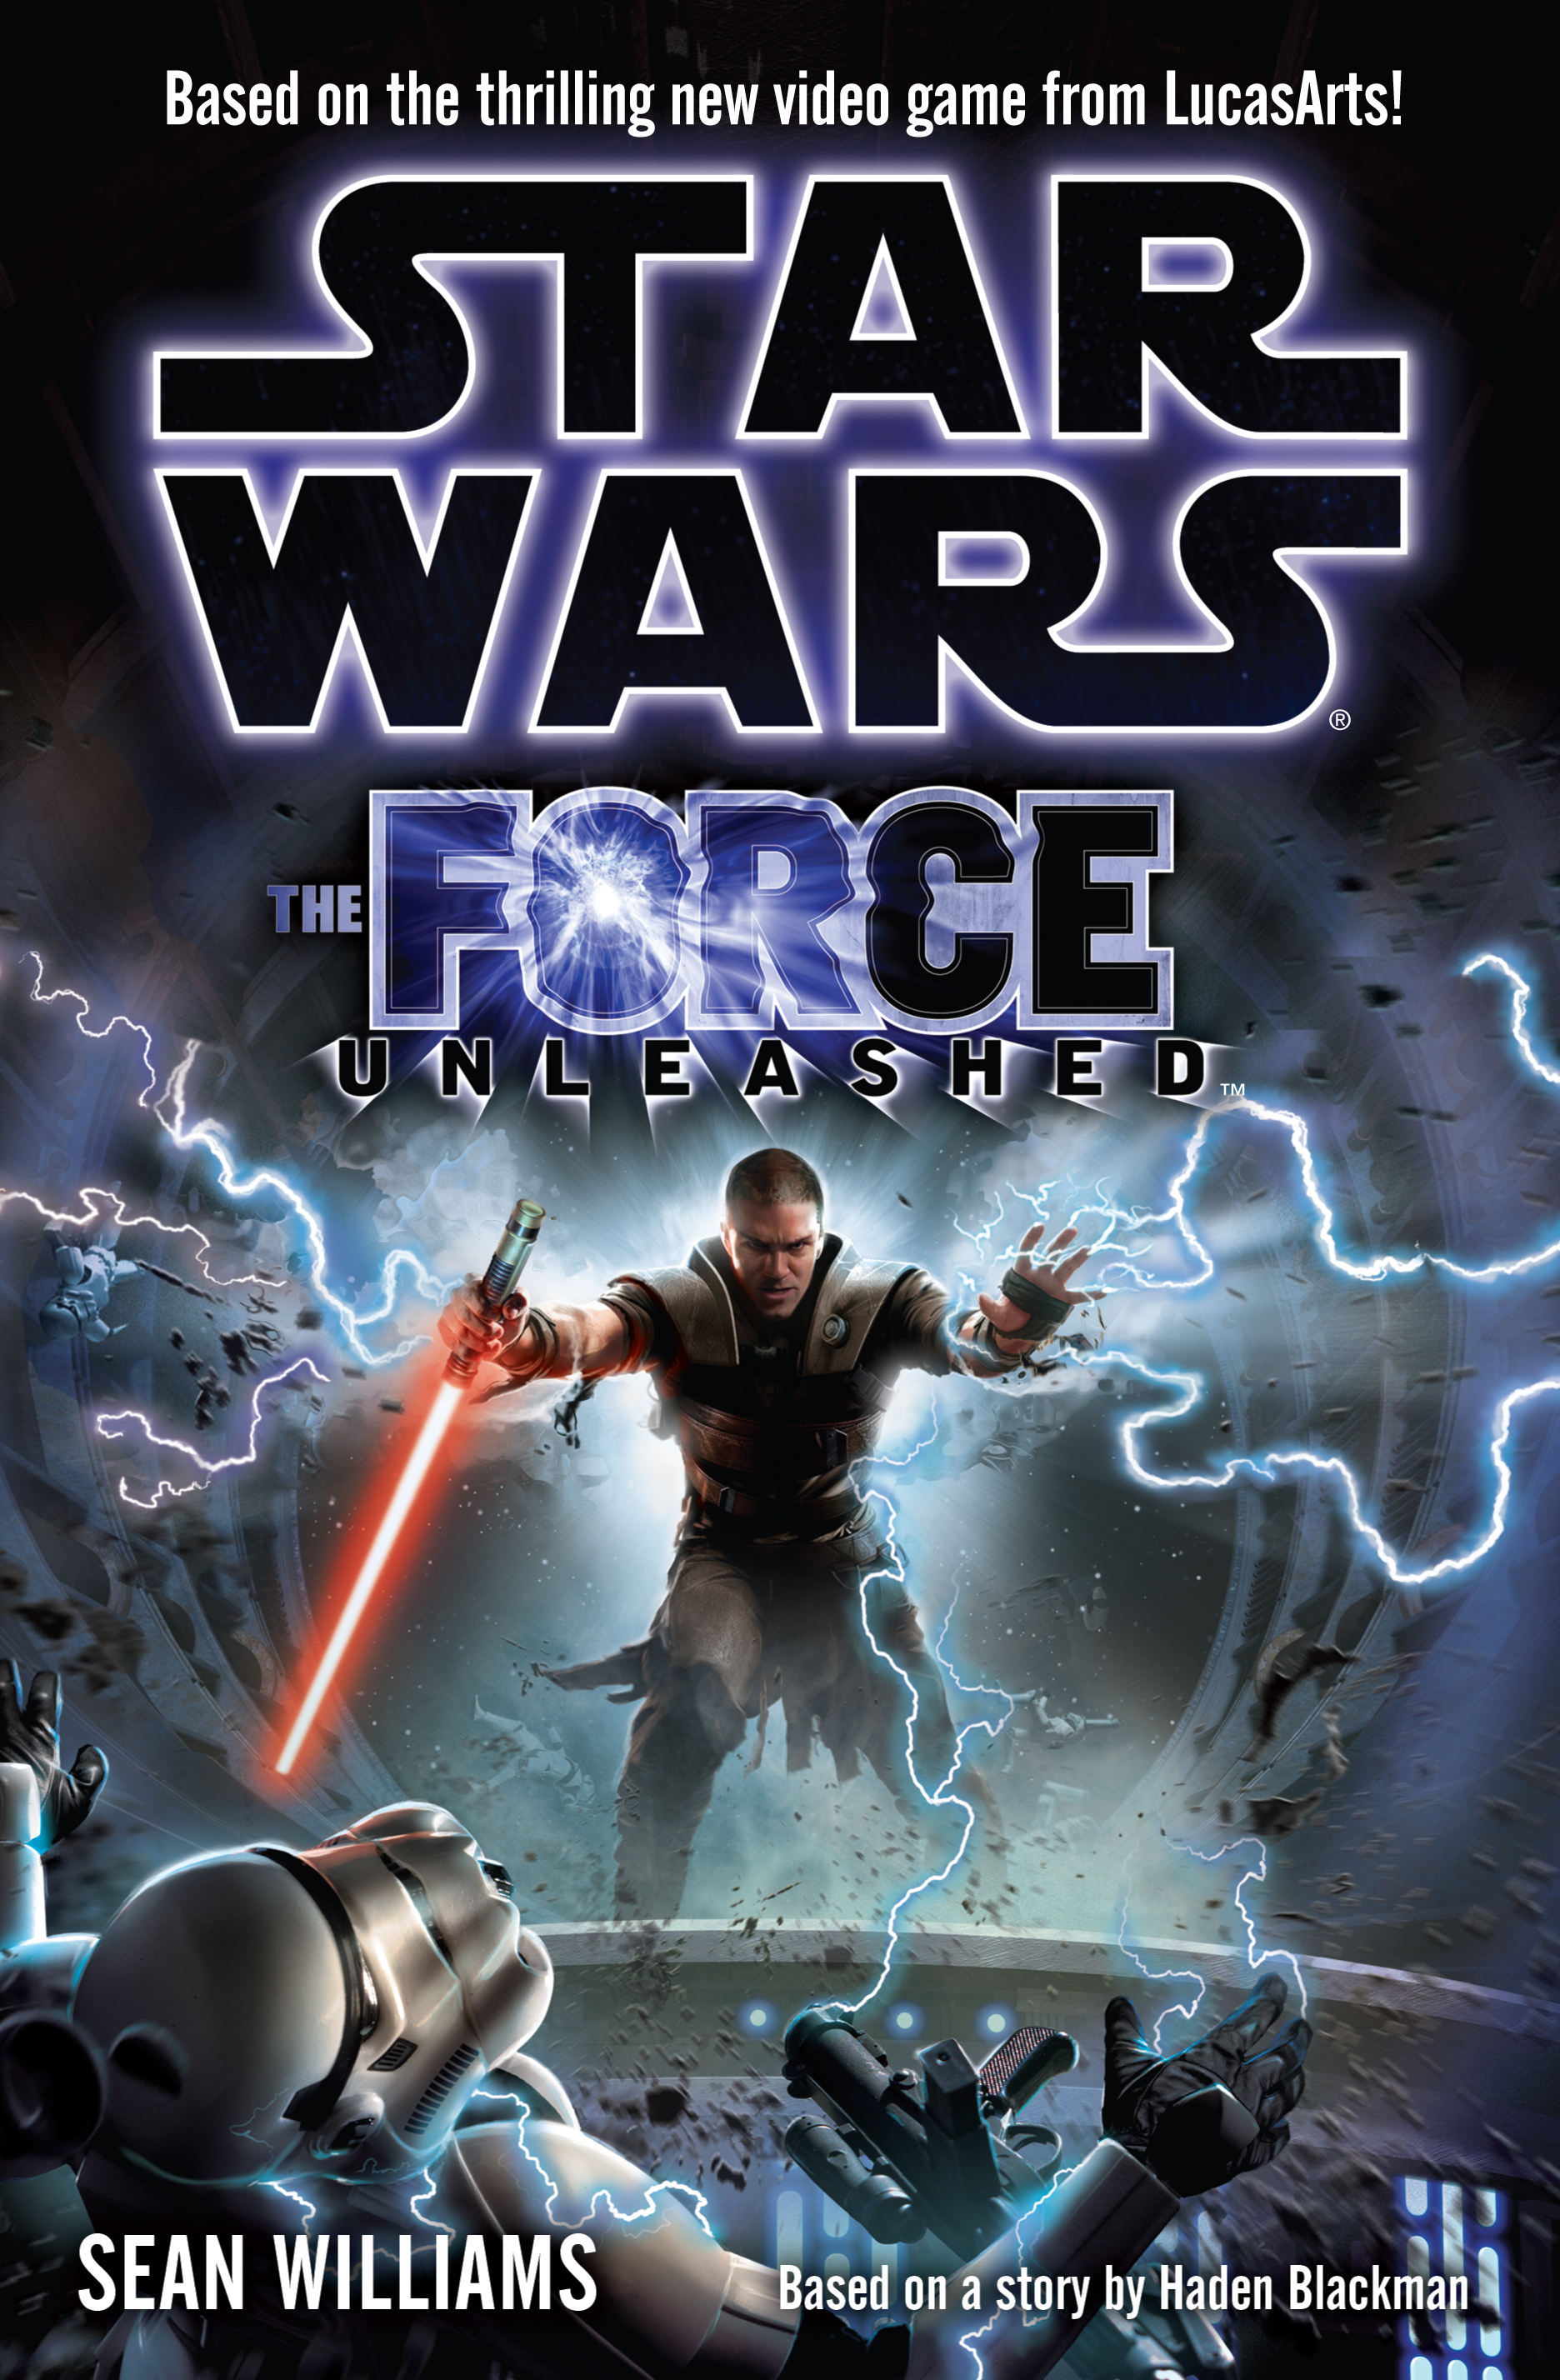 is star wars force awakens book canon